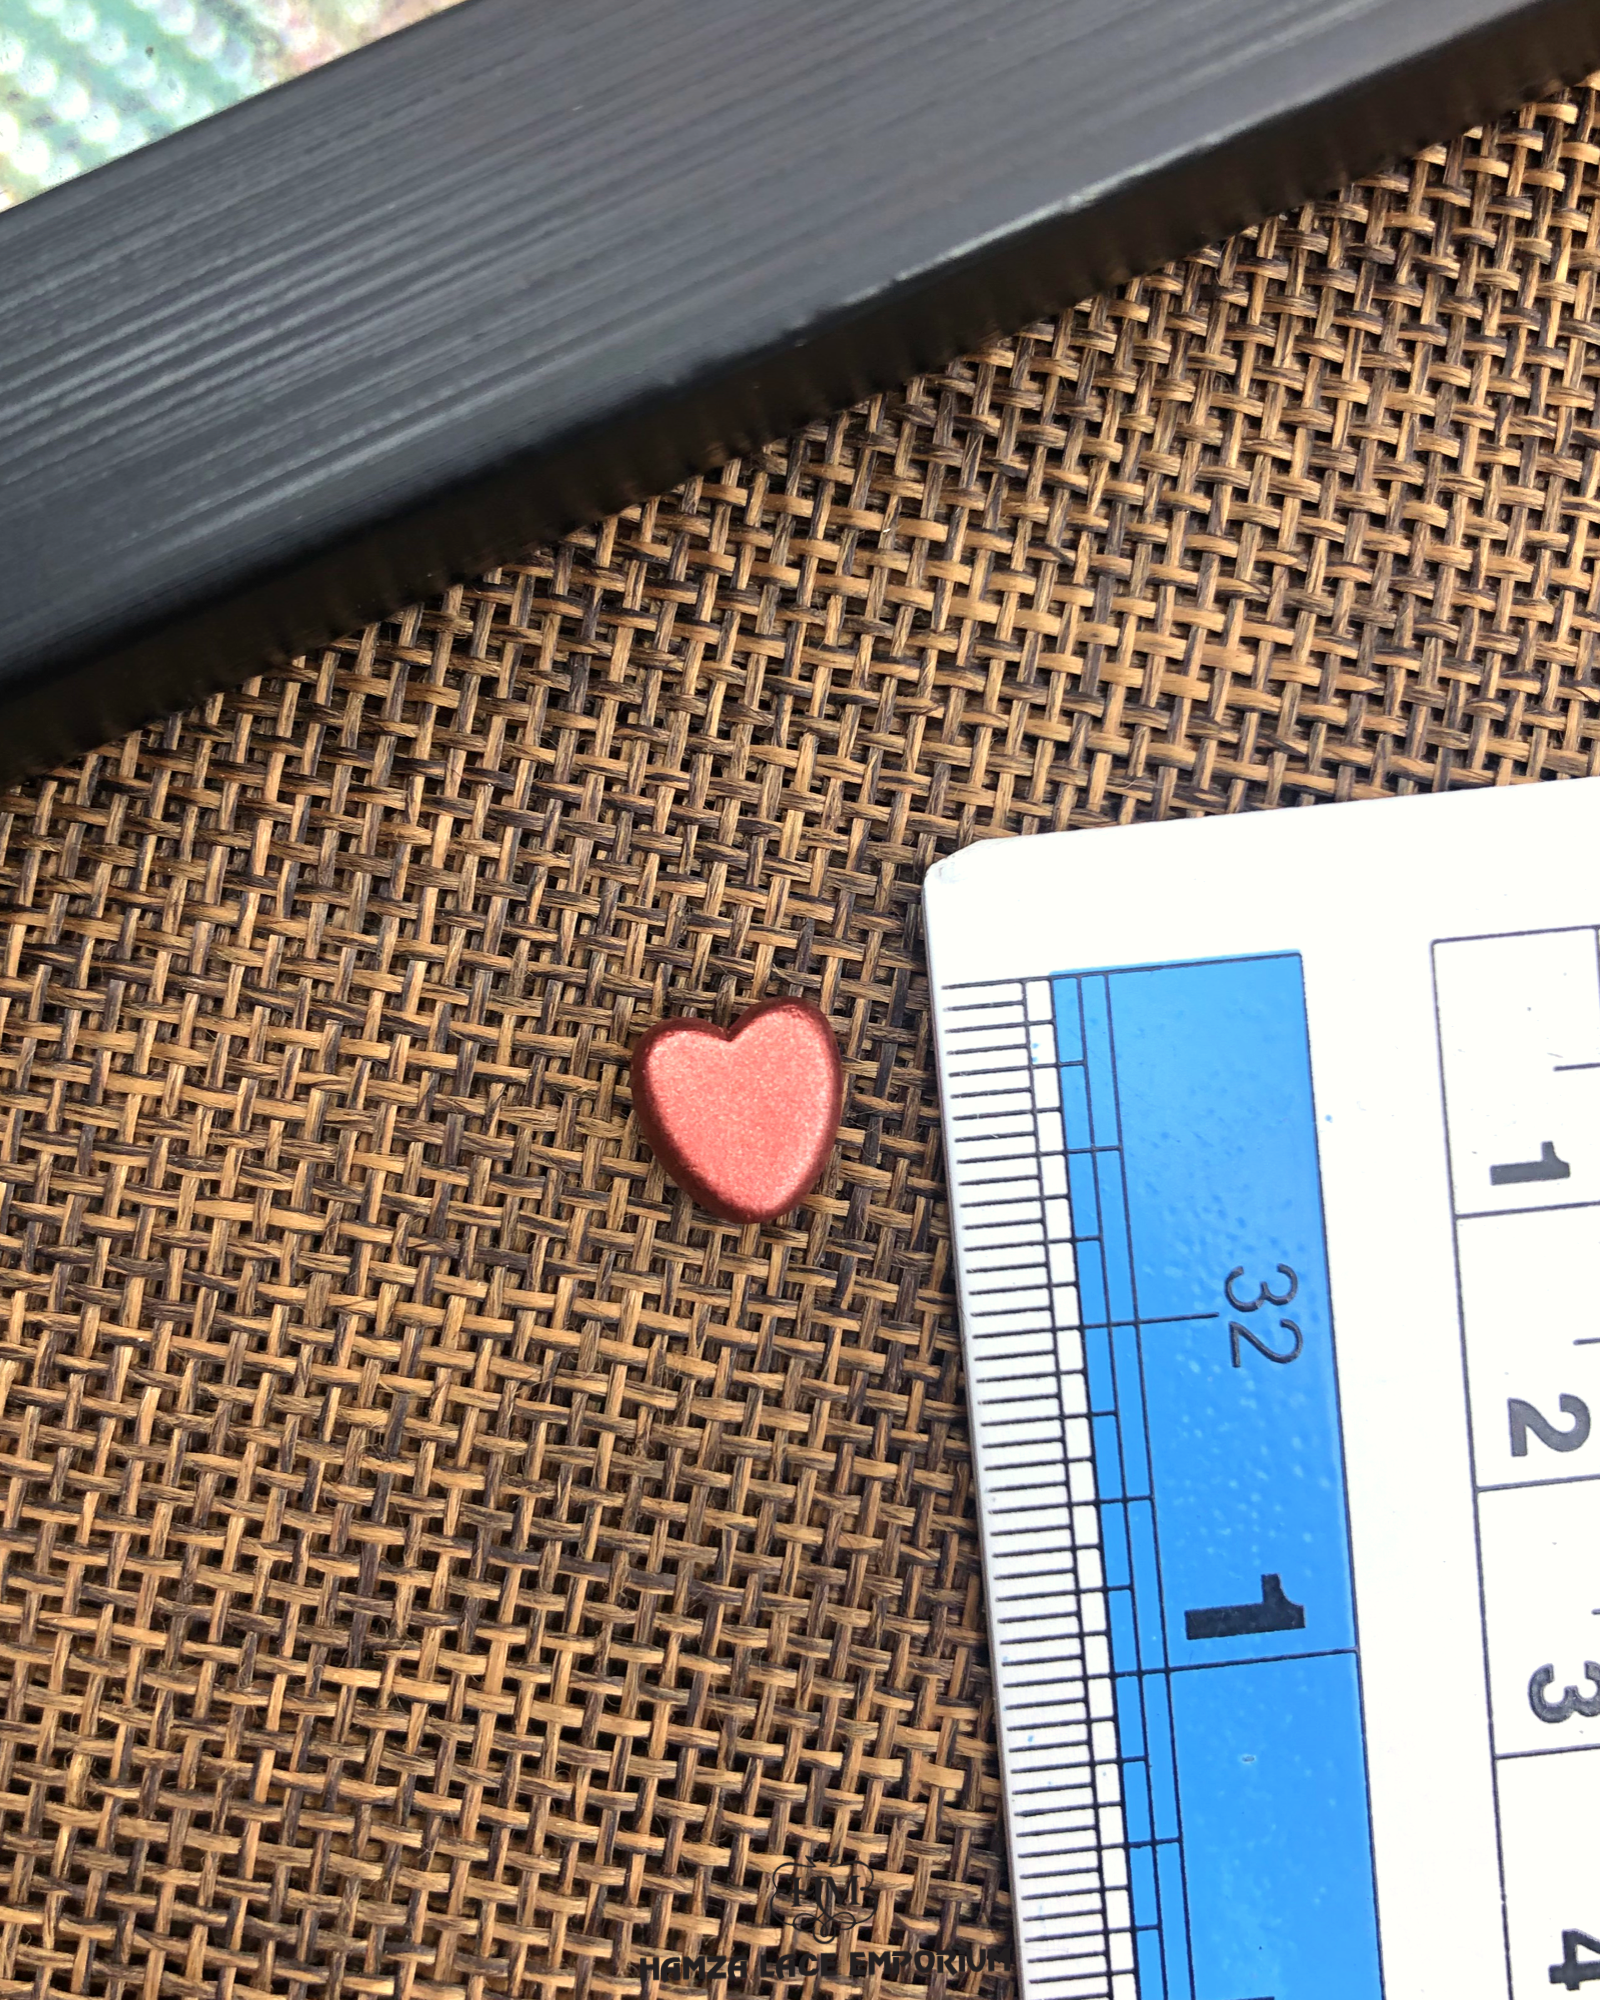 The size of the Beautifully designed 'Heart Shape Accessory PB099' is measured by using a ruler